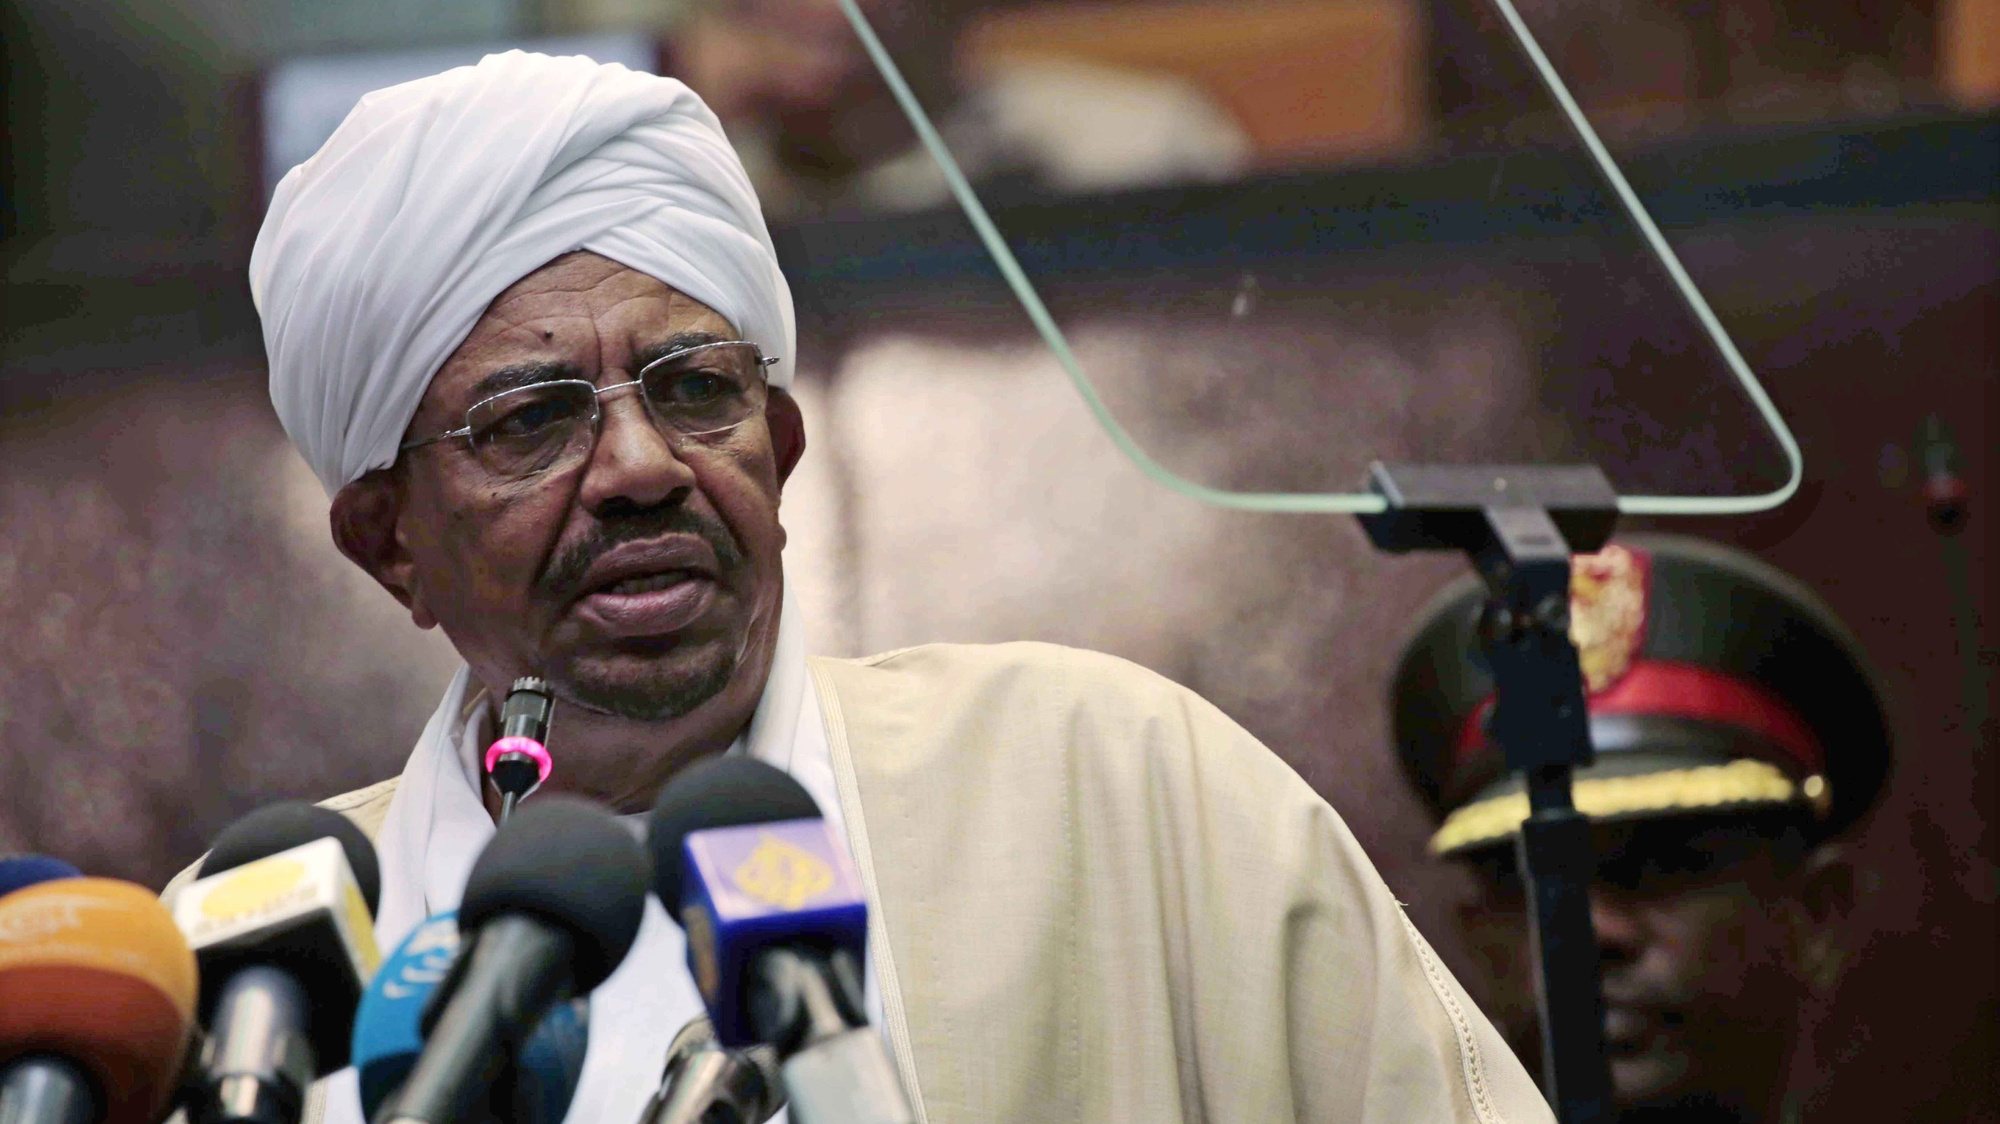 epa08211254 (FILE) - President of Sudan, Omar al-Bashir, addresses Parliament in Khartoum, Sudan, 19 October 2015 (reissued 11 February 2020). According to reports on 11 February 2020, Sudanese authorities will hand ousted president Omar al-Bashir to the International Criminal Court (ICC), where he will be facing charges of war crimes and crimes against humanity related to the war in the Darfur region.  EPA/MORWAN ALI *** Local Caption *** 55400122